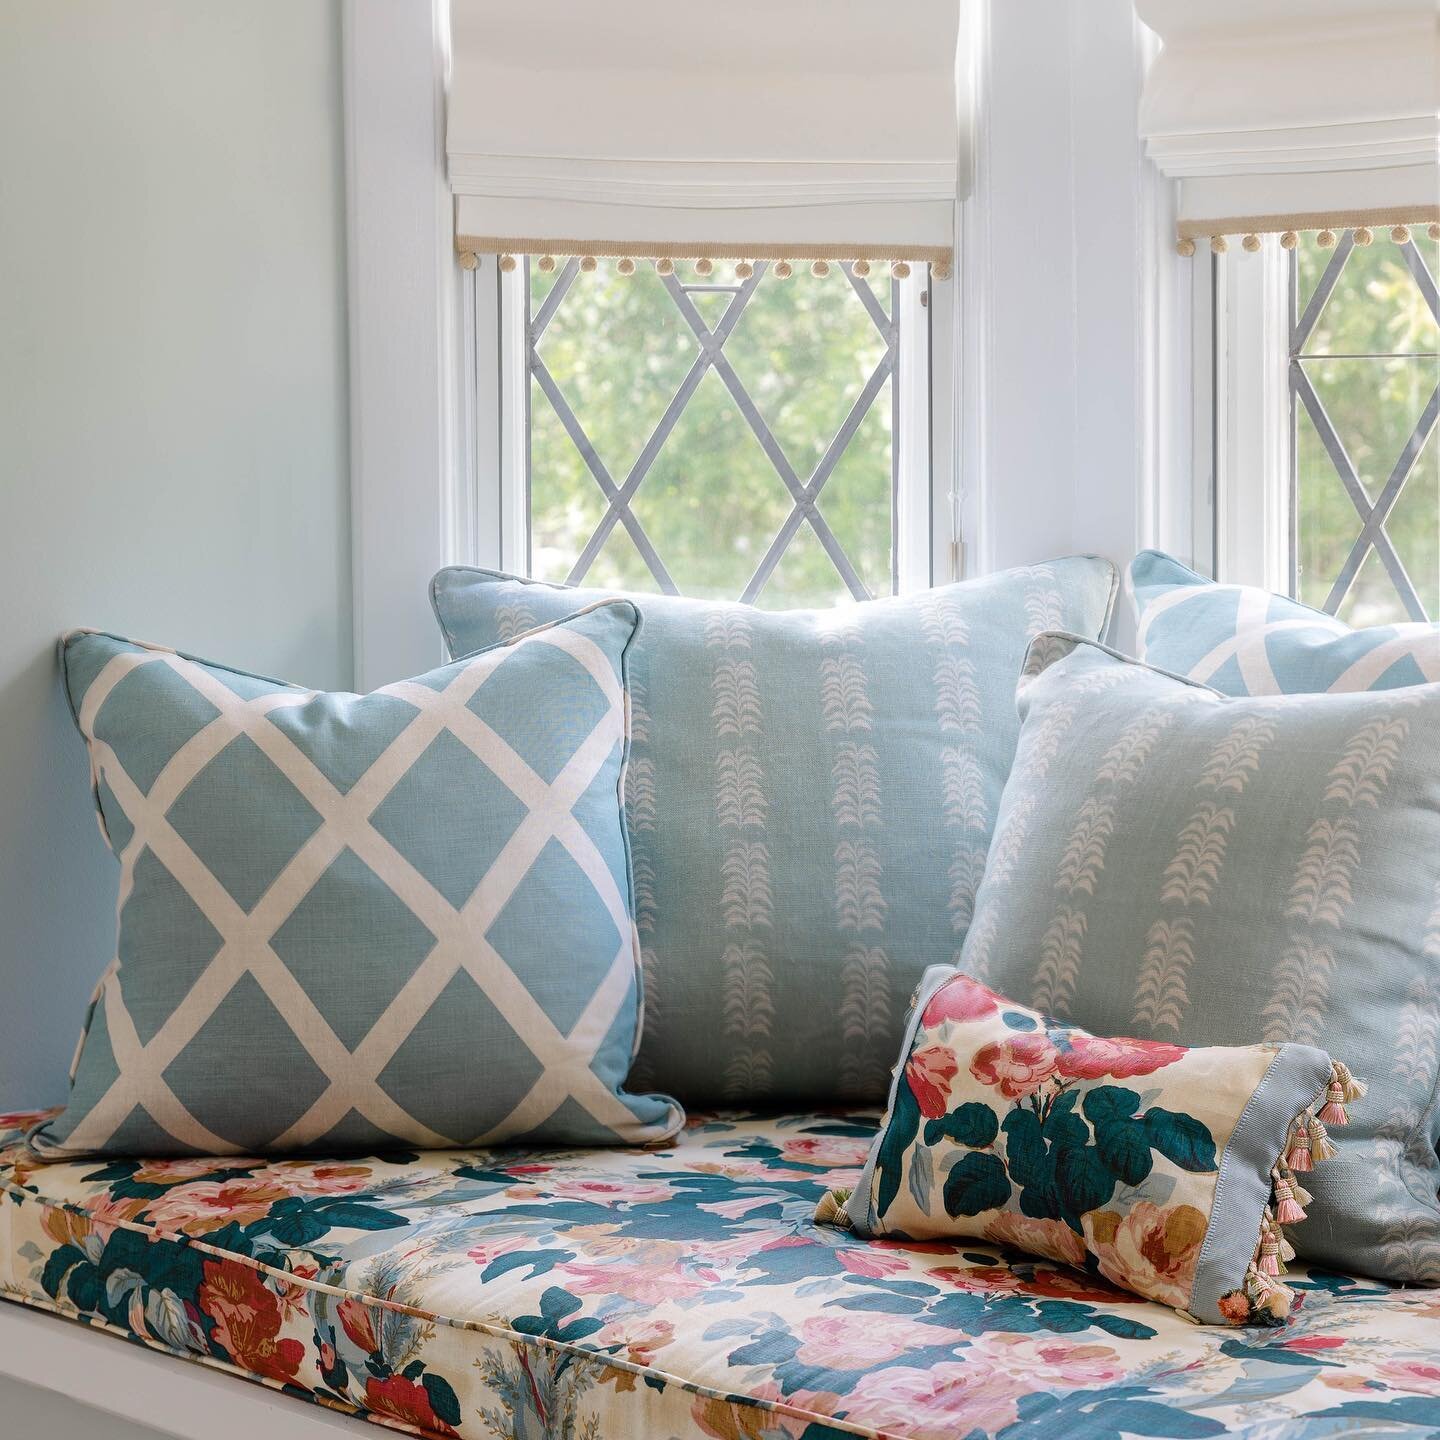 This daylight savings has us wanting to grab a fluffy blanket and curl up in this sun drenched window seat. #jkathryninteriors 

#interiordesign #interiordesigner #classicdesign #traditionaldesign #newtraditional #modernmeetstraditional #interiorinsp